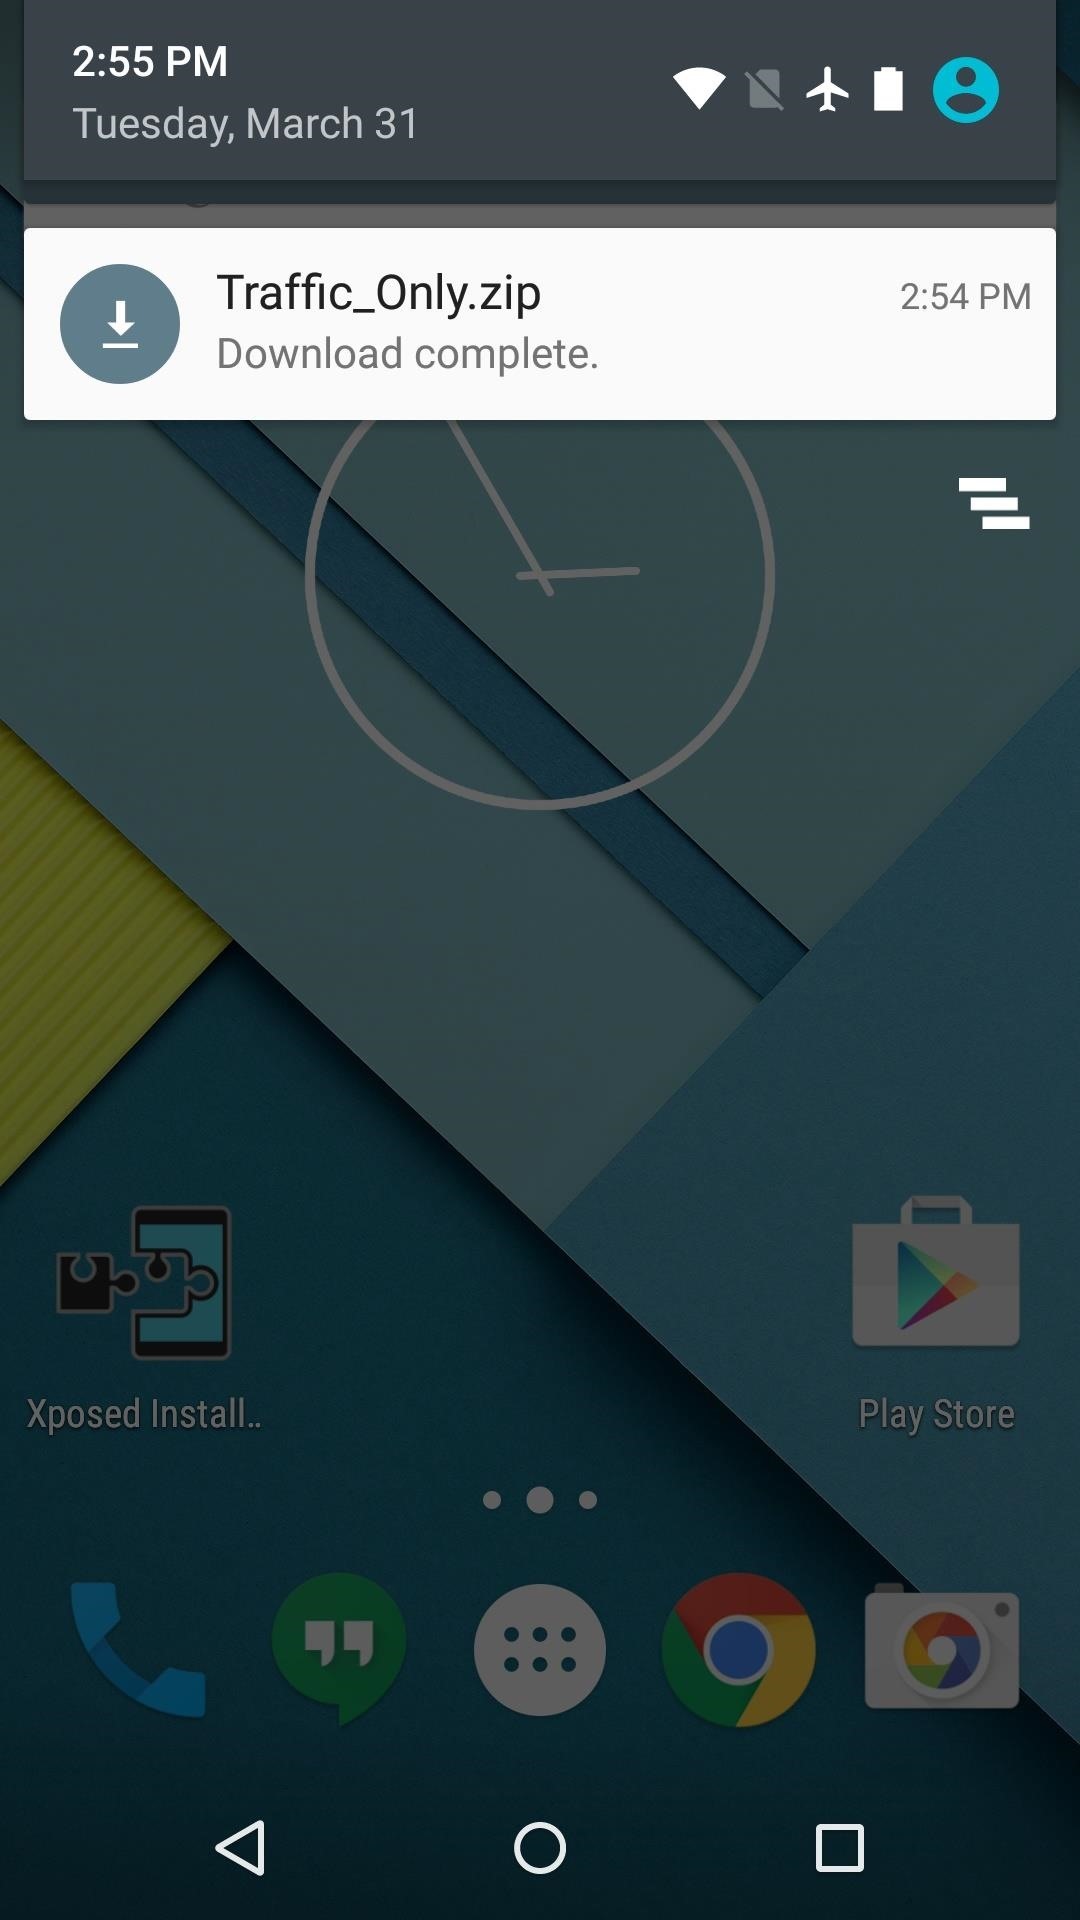 How to Add a Data Traffic Meter to Your Nexus 5's Status Bar